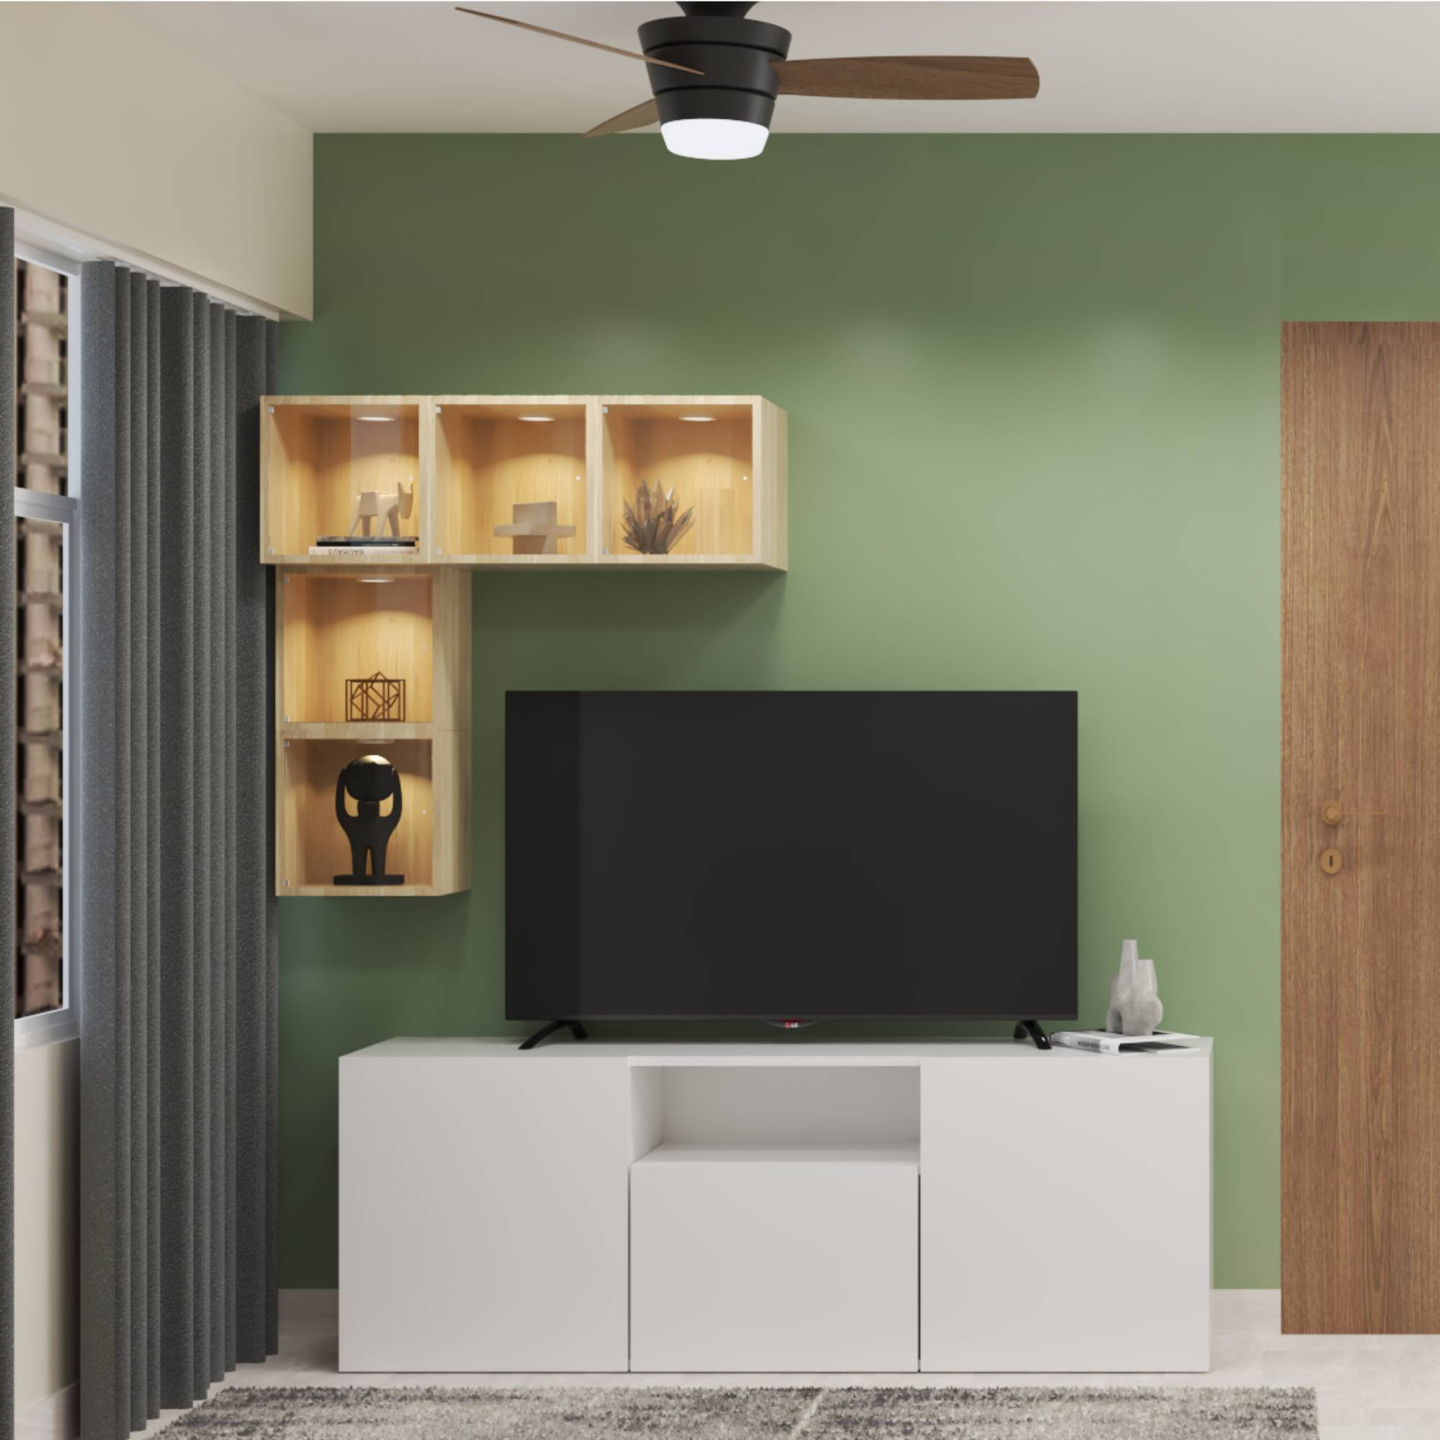 TV Unit With Wall Storage - Livspace